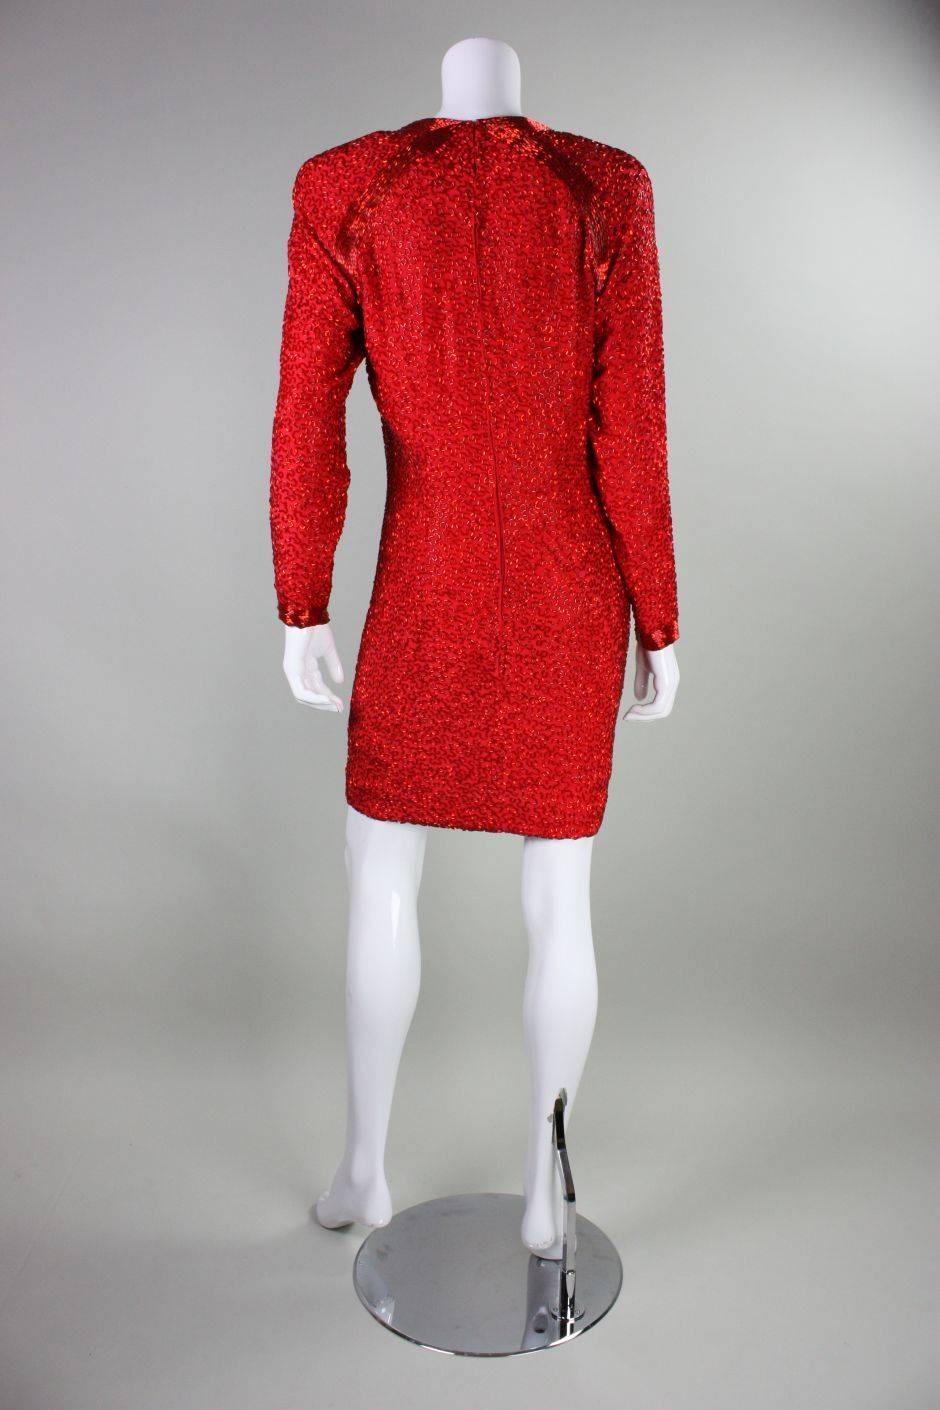 Women's 1980's Stephen Yurich Red Beaded Cocktail Dress For Sale